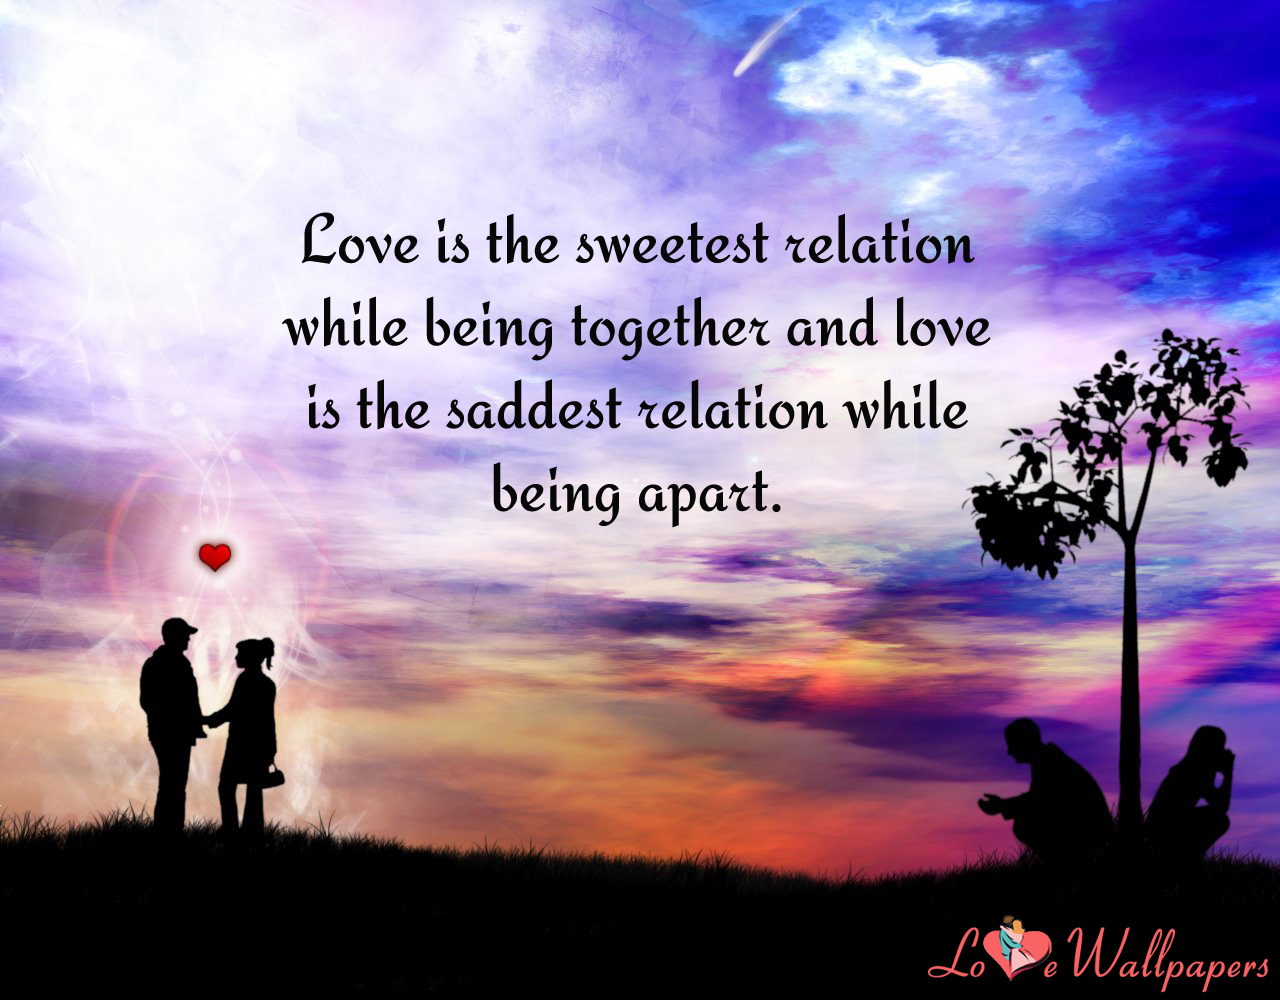 sad love story wallpaper,people in nature,sky,text,natural landscape ...